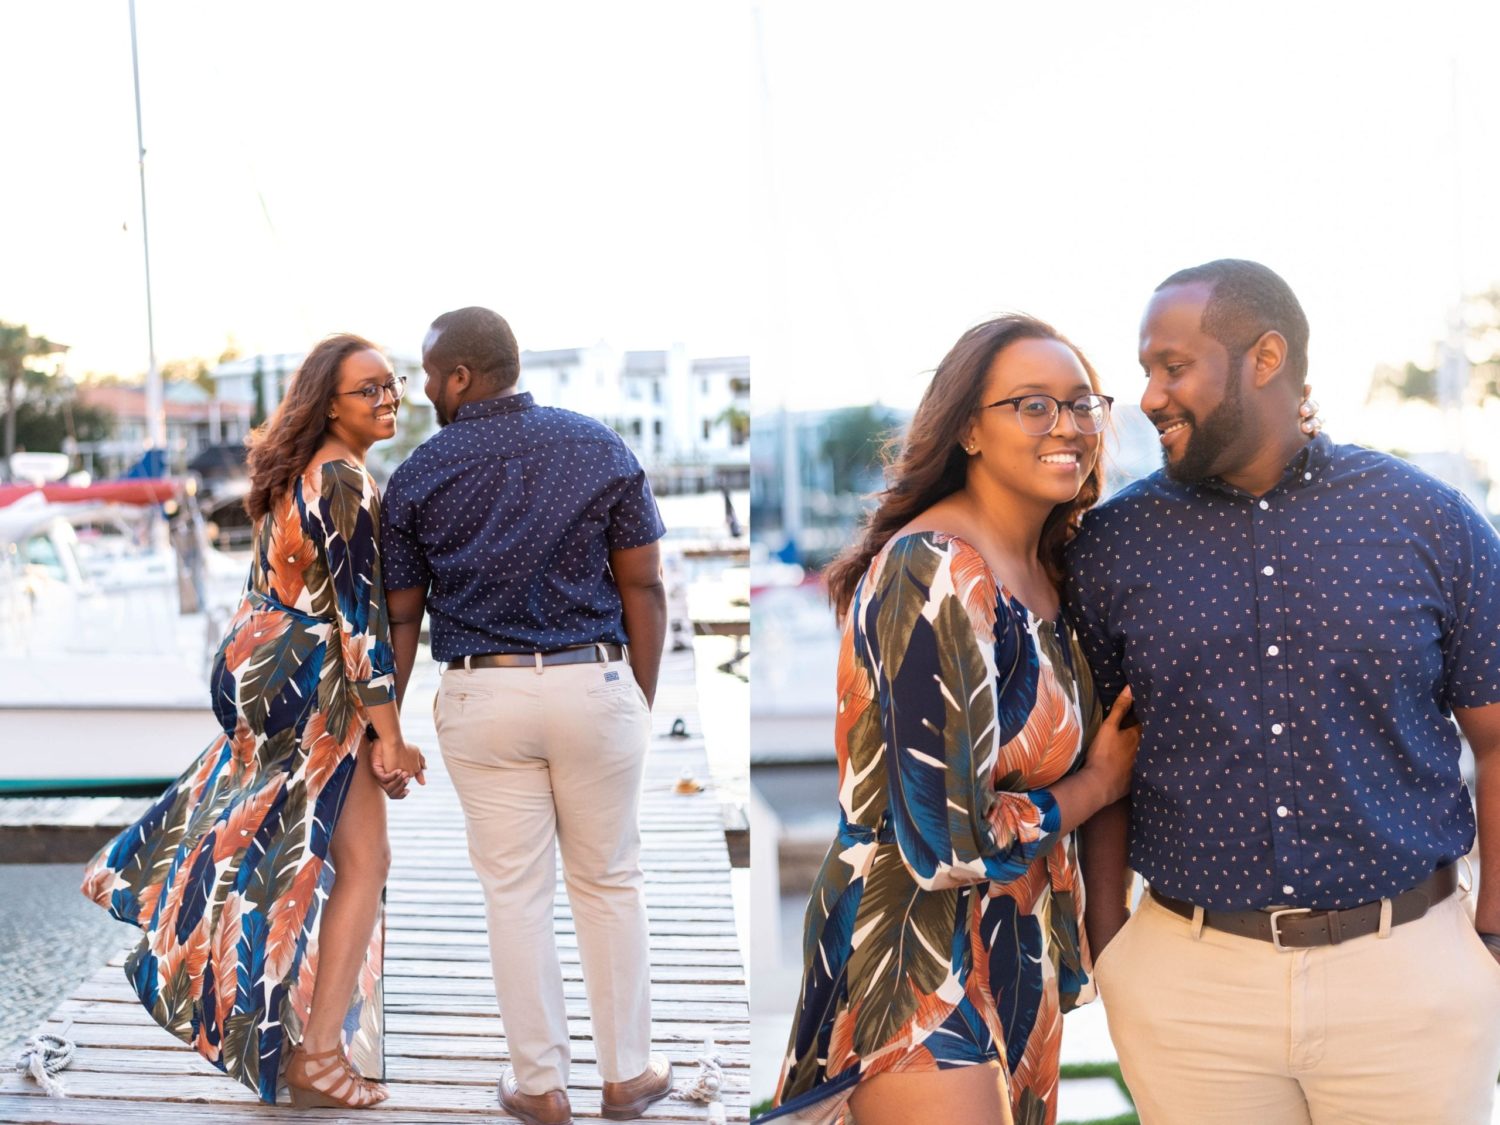 The mirasol davis island engagement session at the pier by the boats